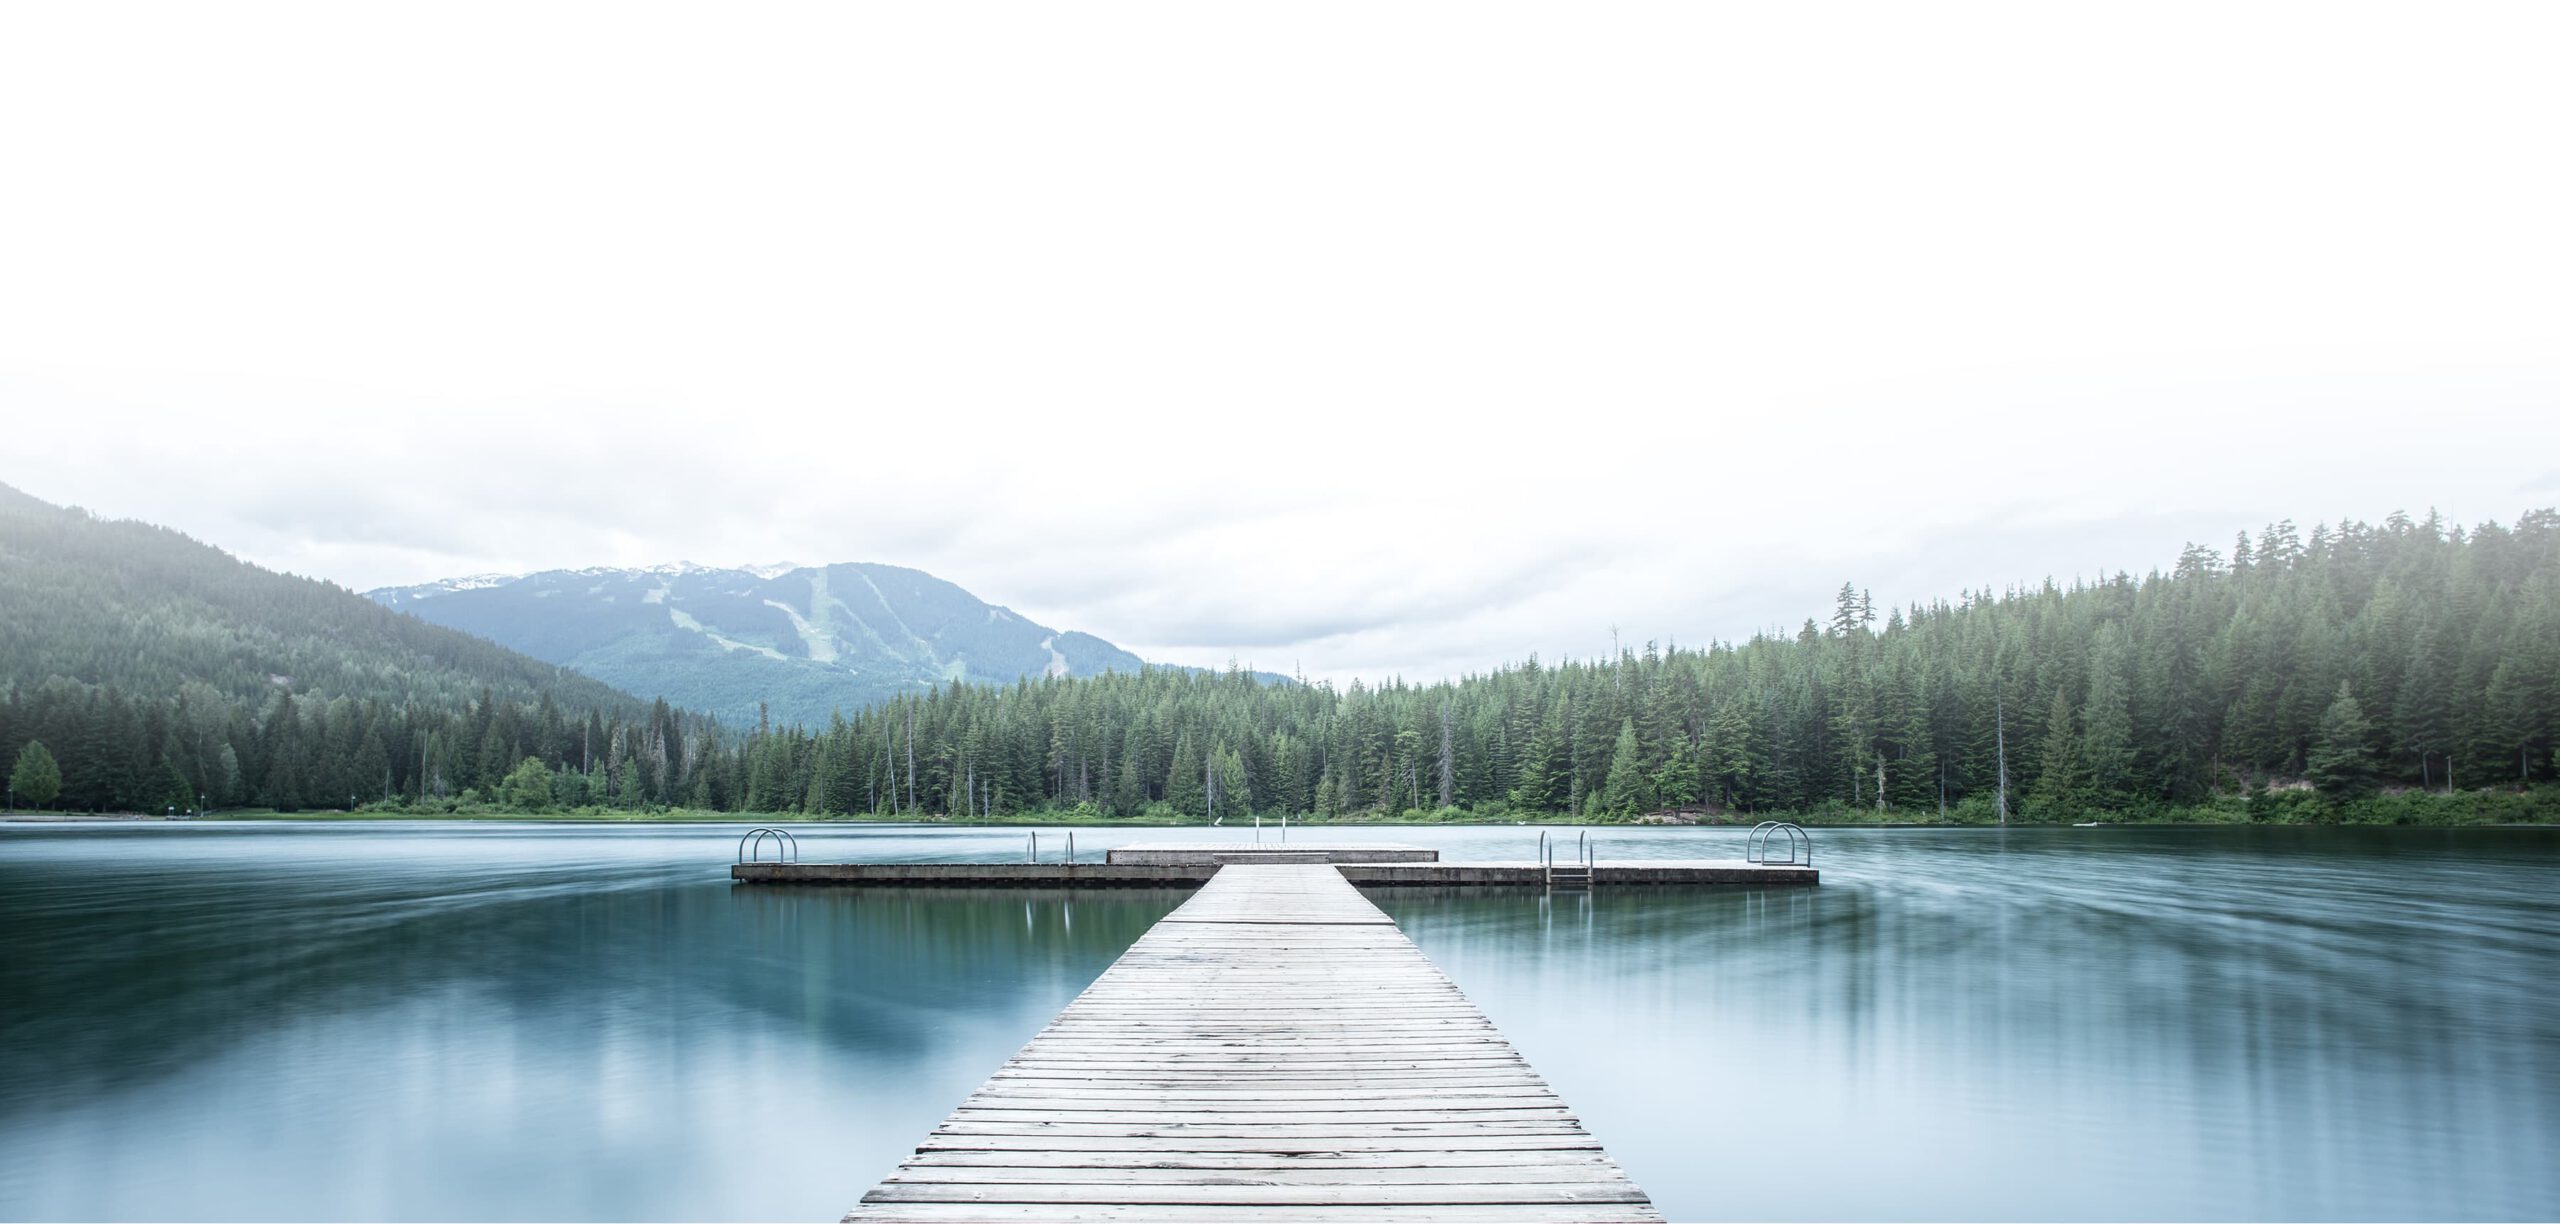 Dock leading out into a lake with mountains in the background